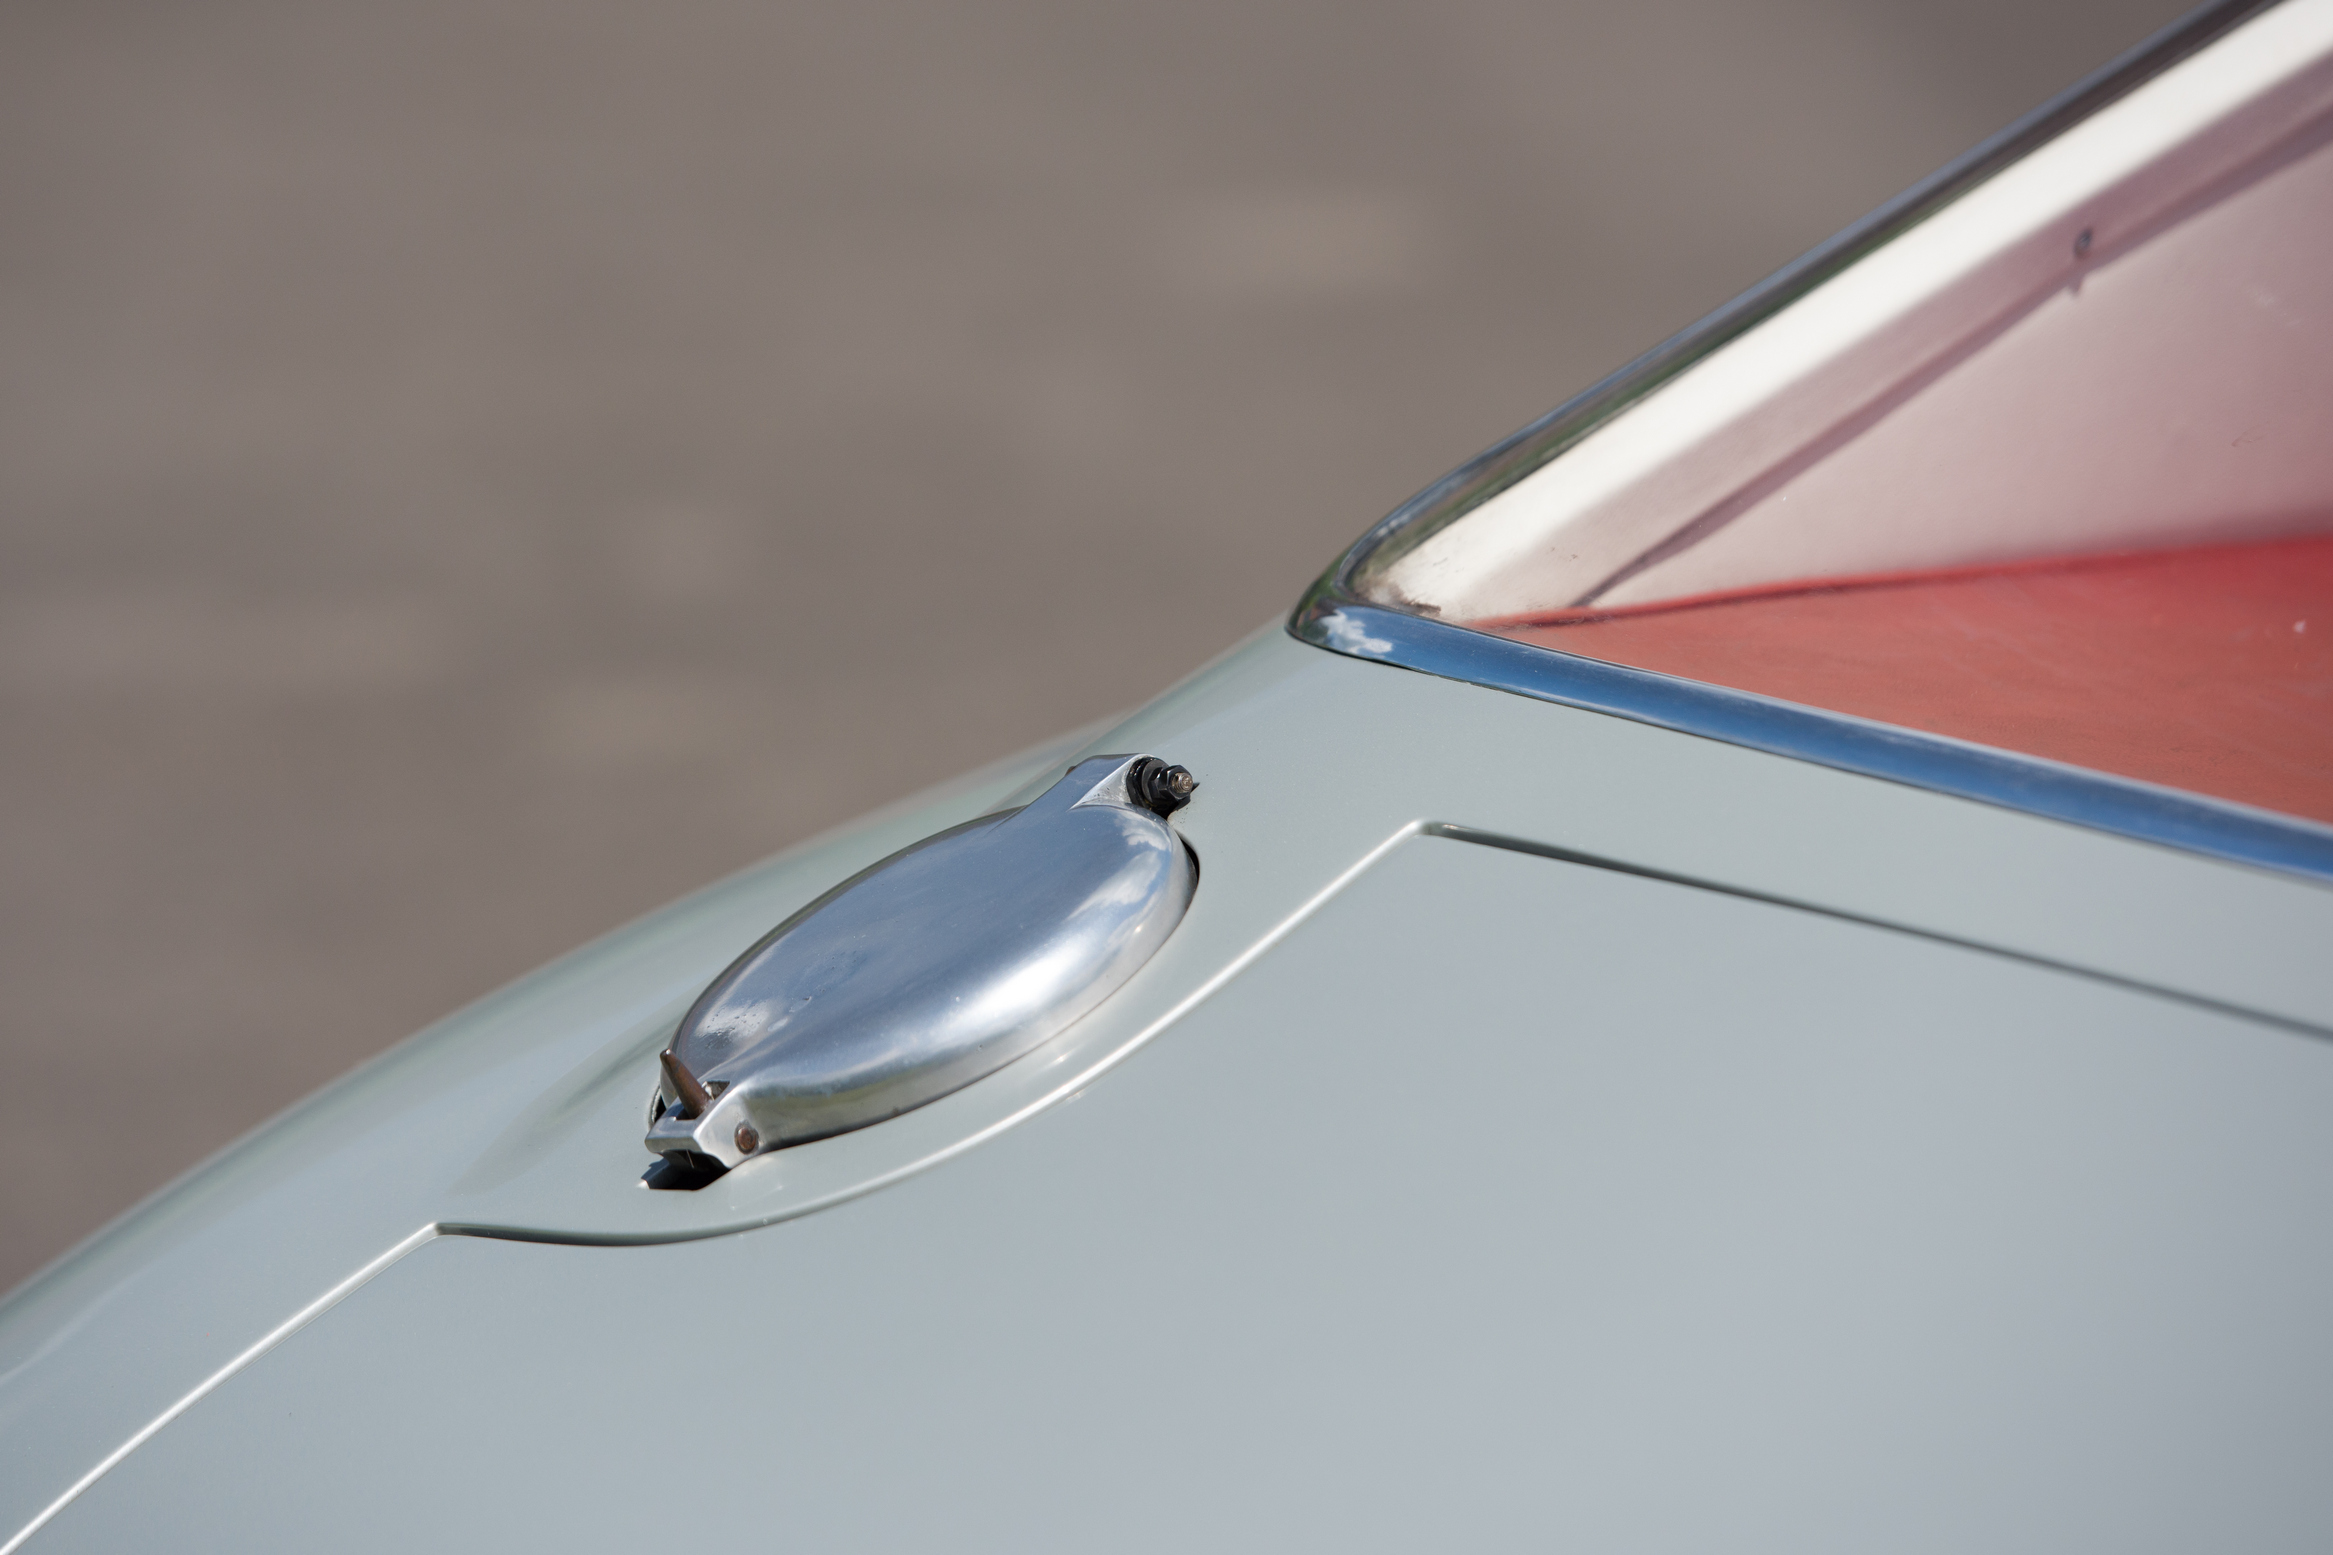 One of the 250 GT SWB fuel filler placement options